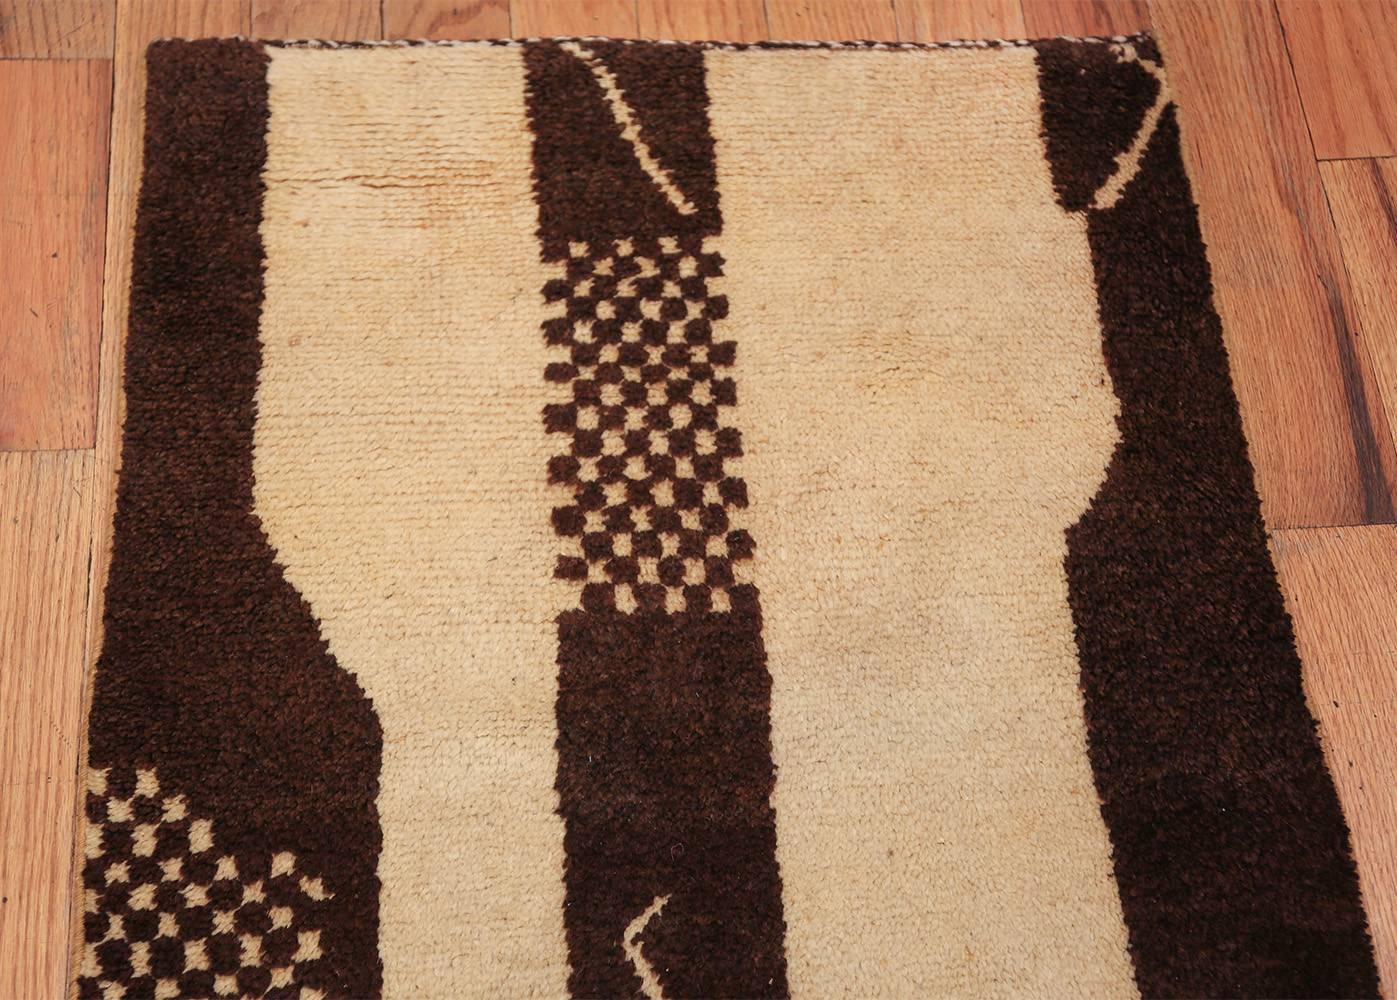 Hand-Woven Simple Cream and Brown Vintage Moroccan Runner Rug